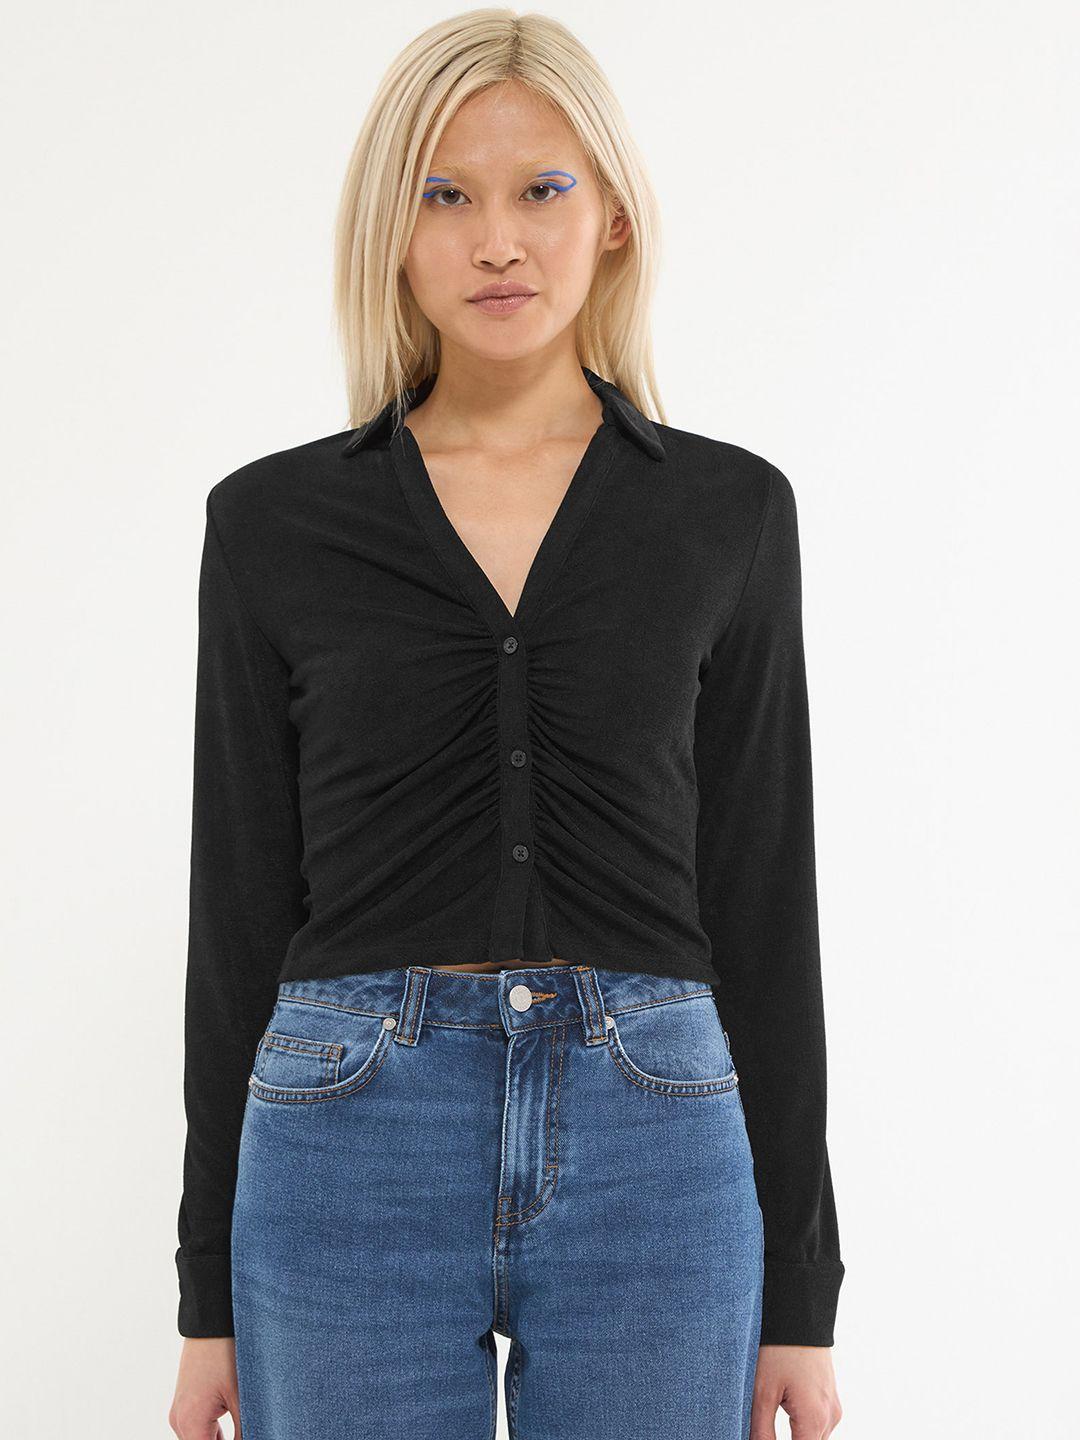 terranova-ruched-detail-shirt-style-top